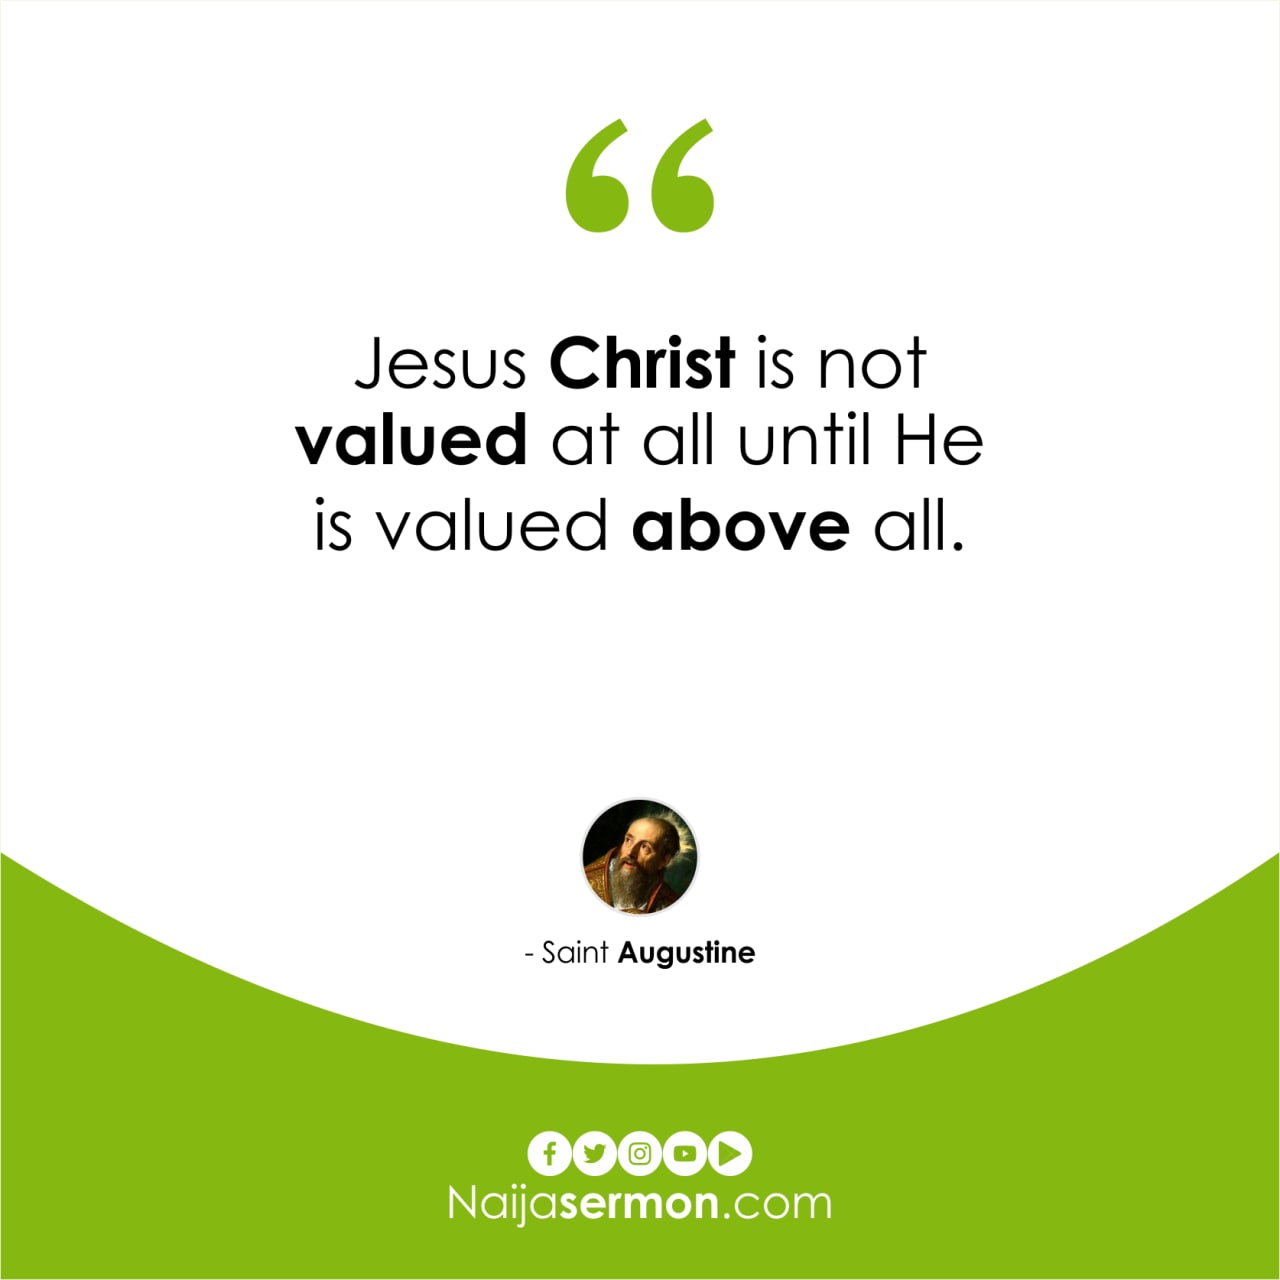 QUOTE OF THE DAY BY SAINT AUGUSTINE 1